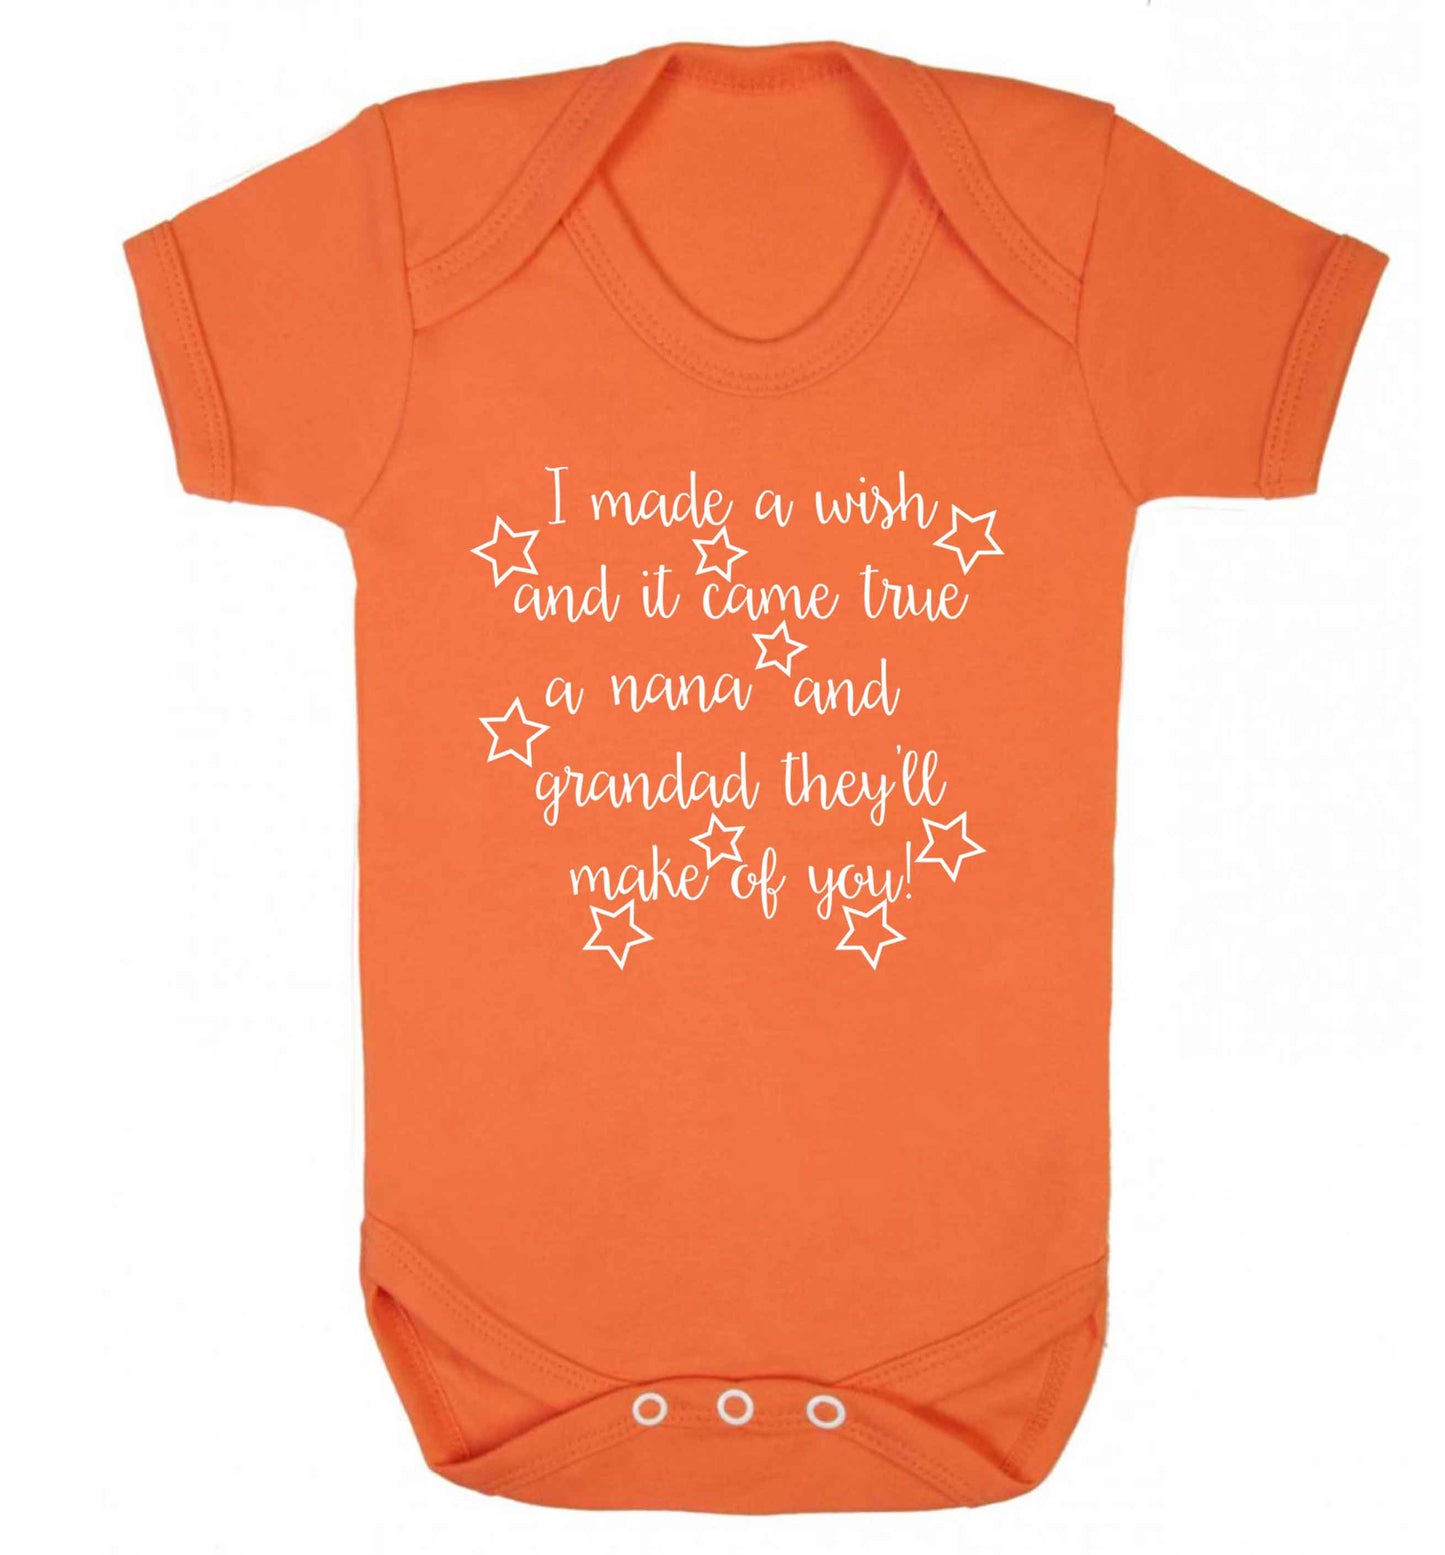 I made a wish and it came true a nana and grandad they'll make of you! Baby Vest orange 18-24 months